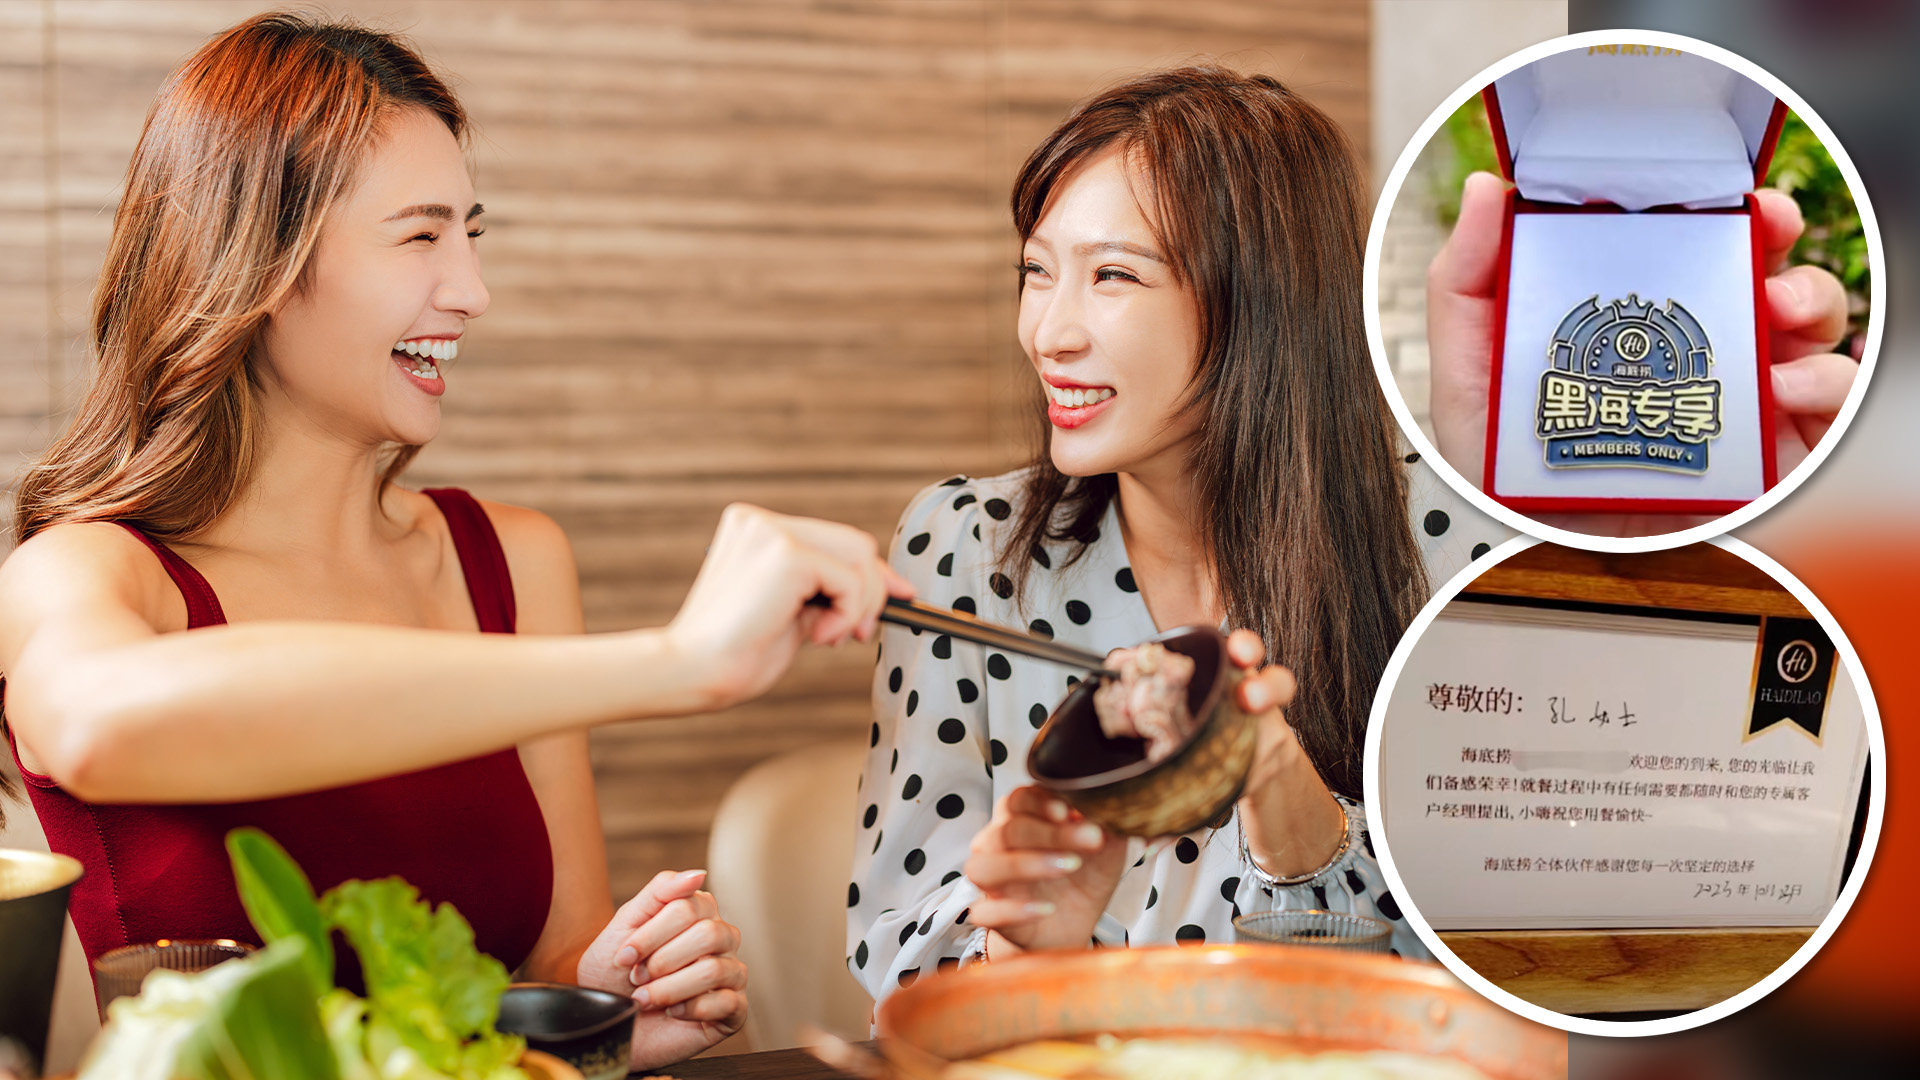 A woman in China has revealed that she is so “addicted” to eating hotpot that she has spent US$38,000 consuming the dish more than 600 times over the past nine years. Photo: SCMP composite/Shutterstock/Douyin